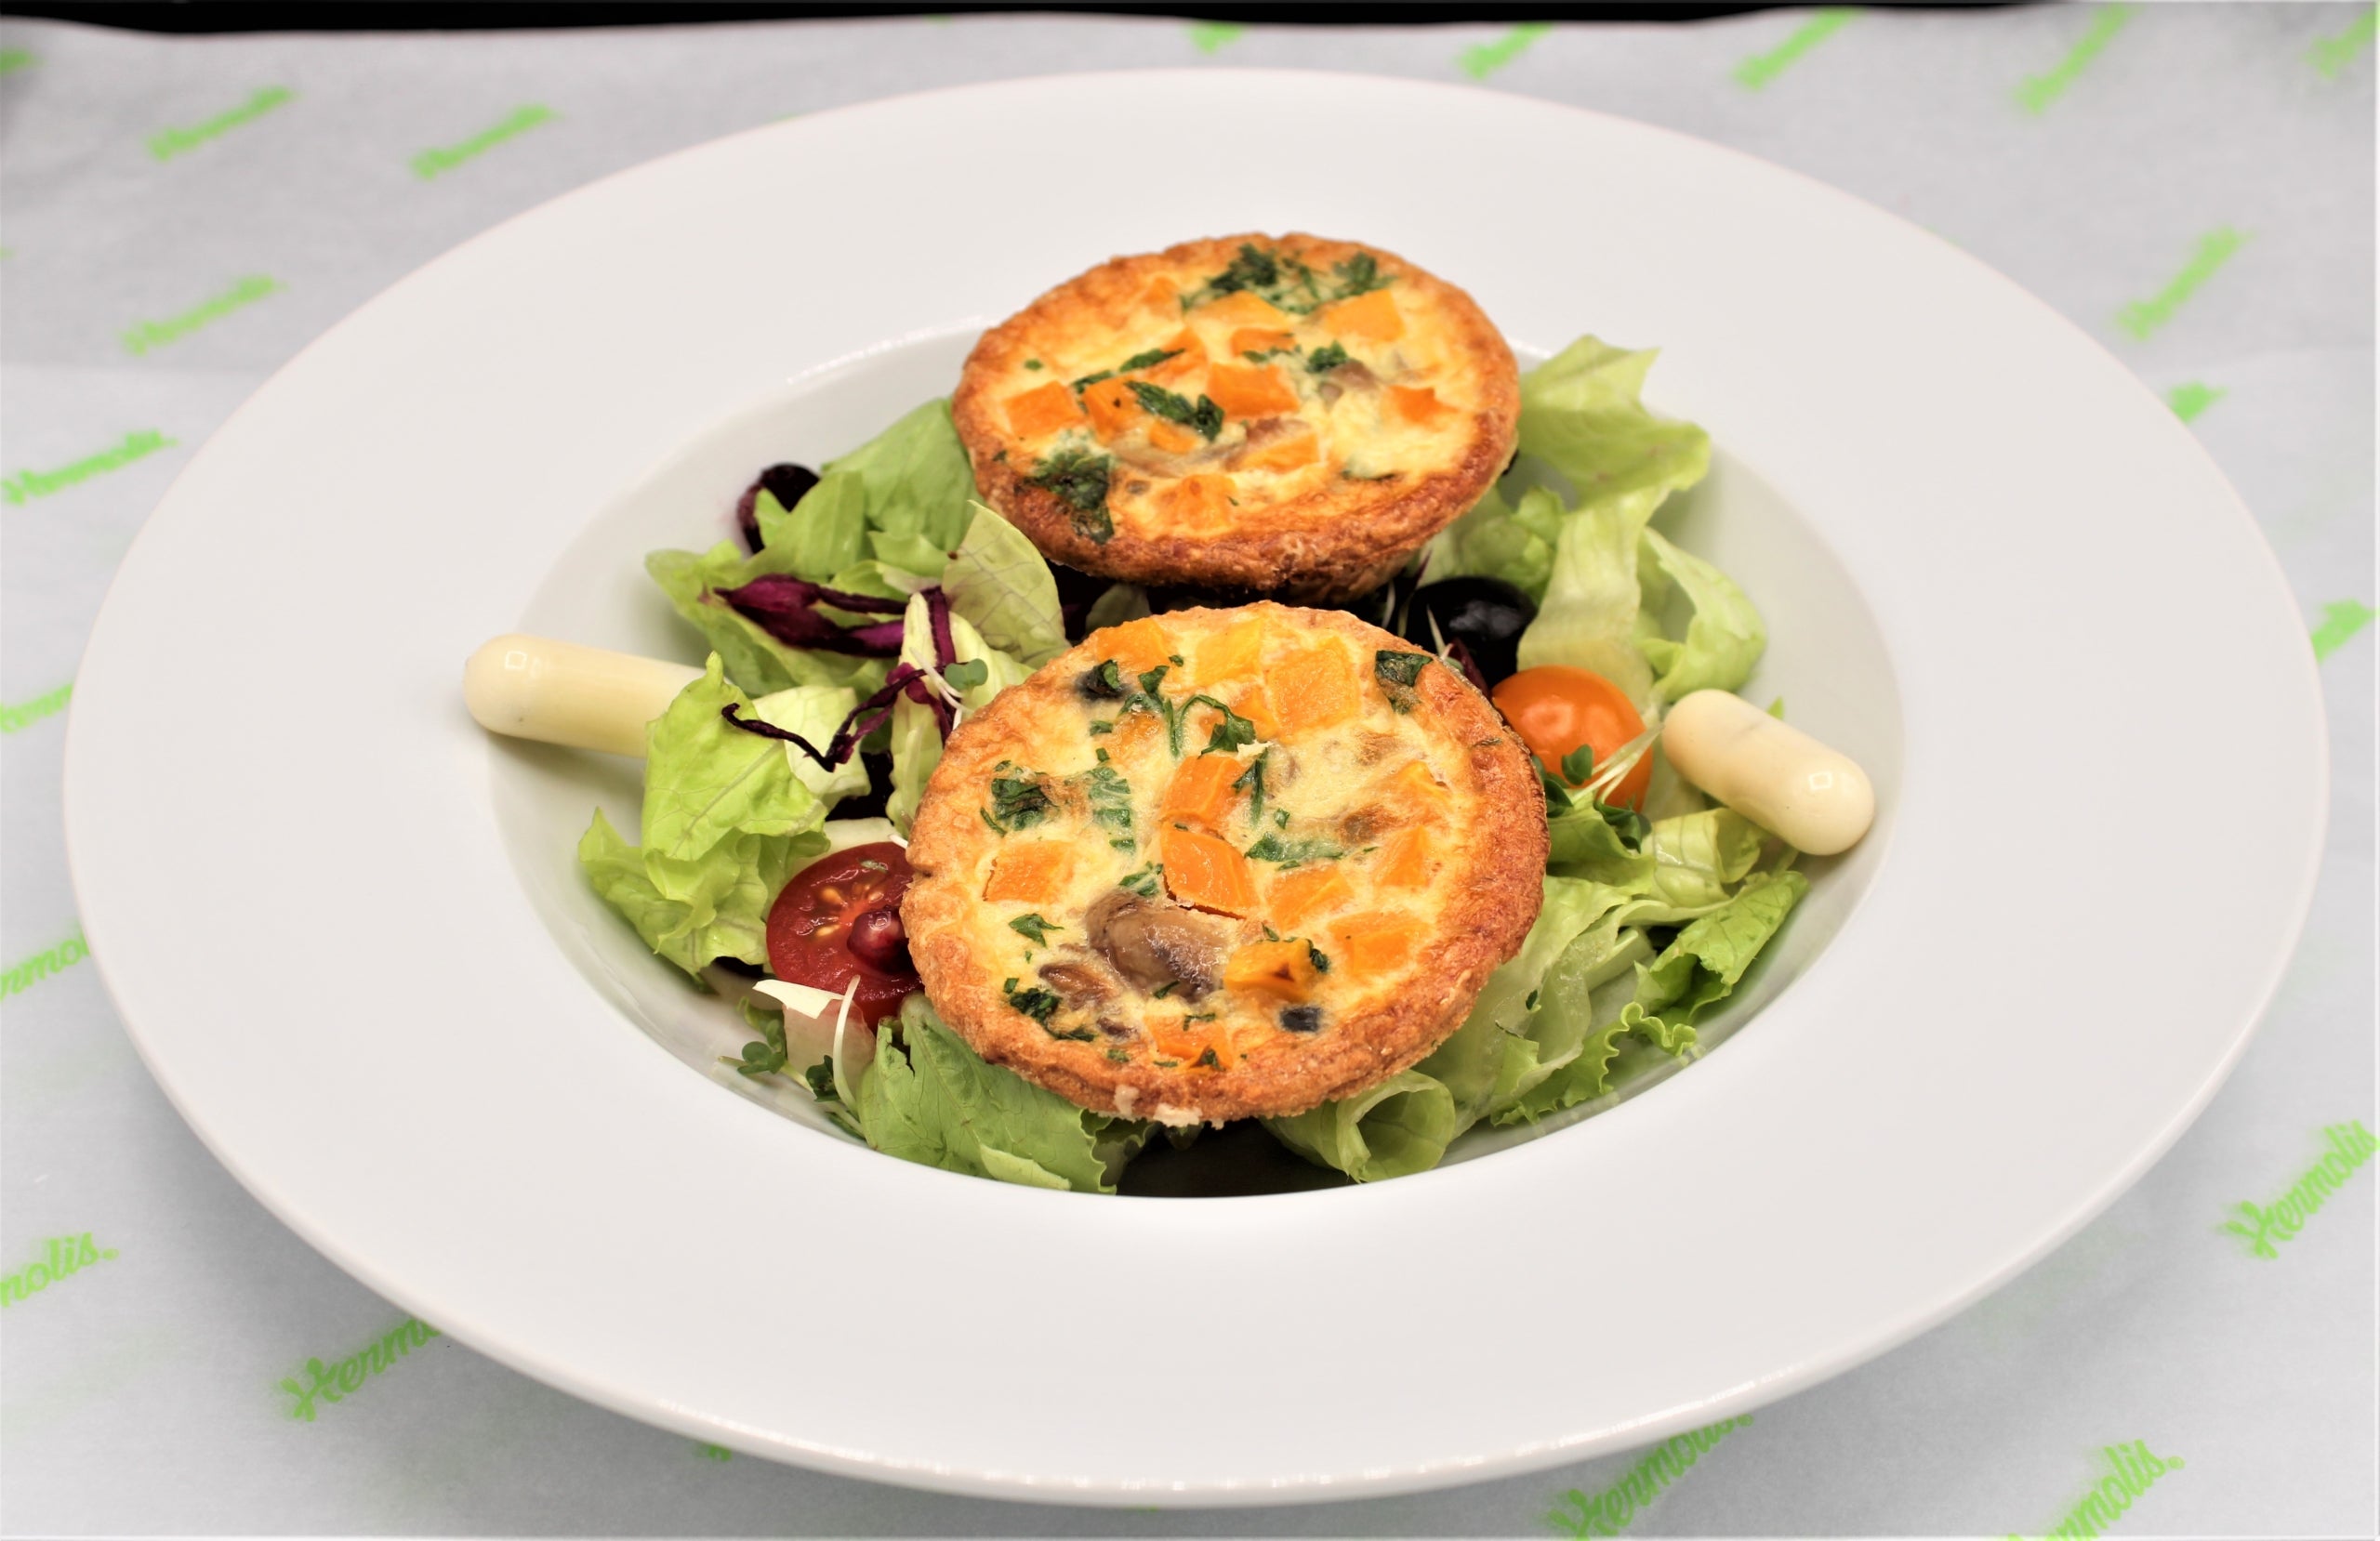 Warm Tart filled with Pumpkin, Red Onions, Mushrooms And Rosemary served with a Mixed Leaf Salad